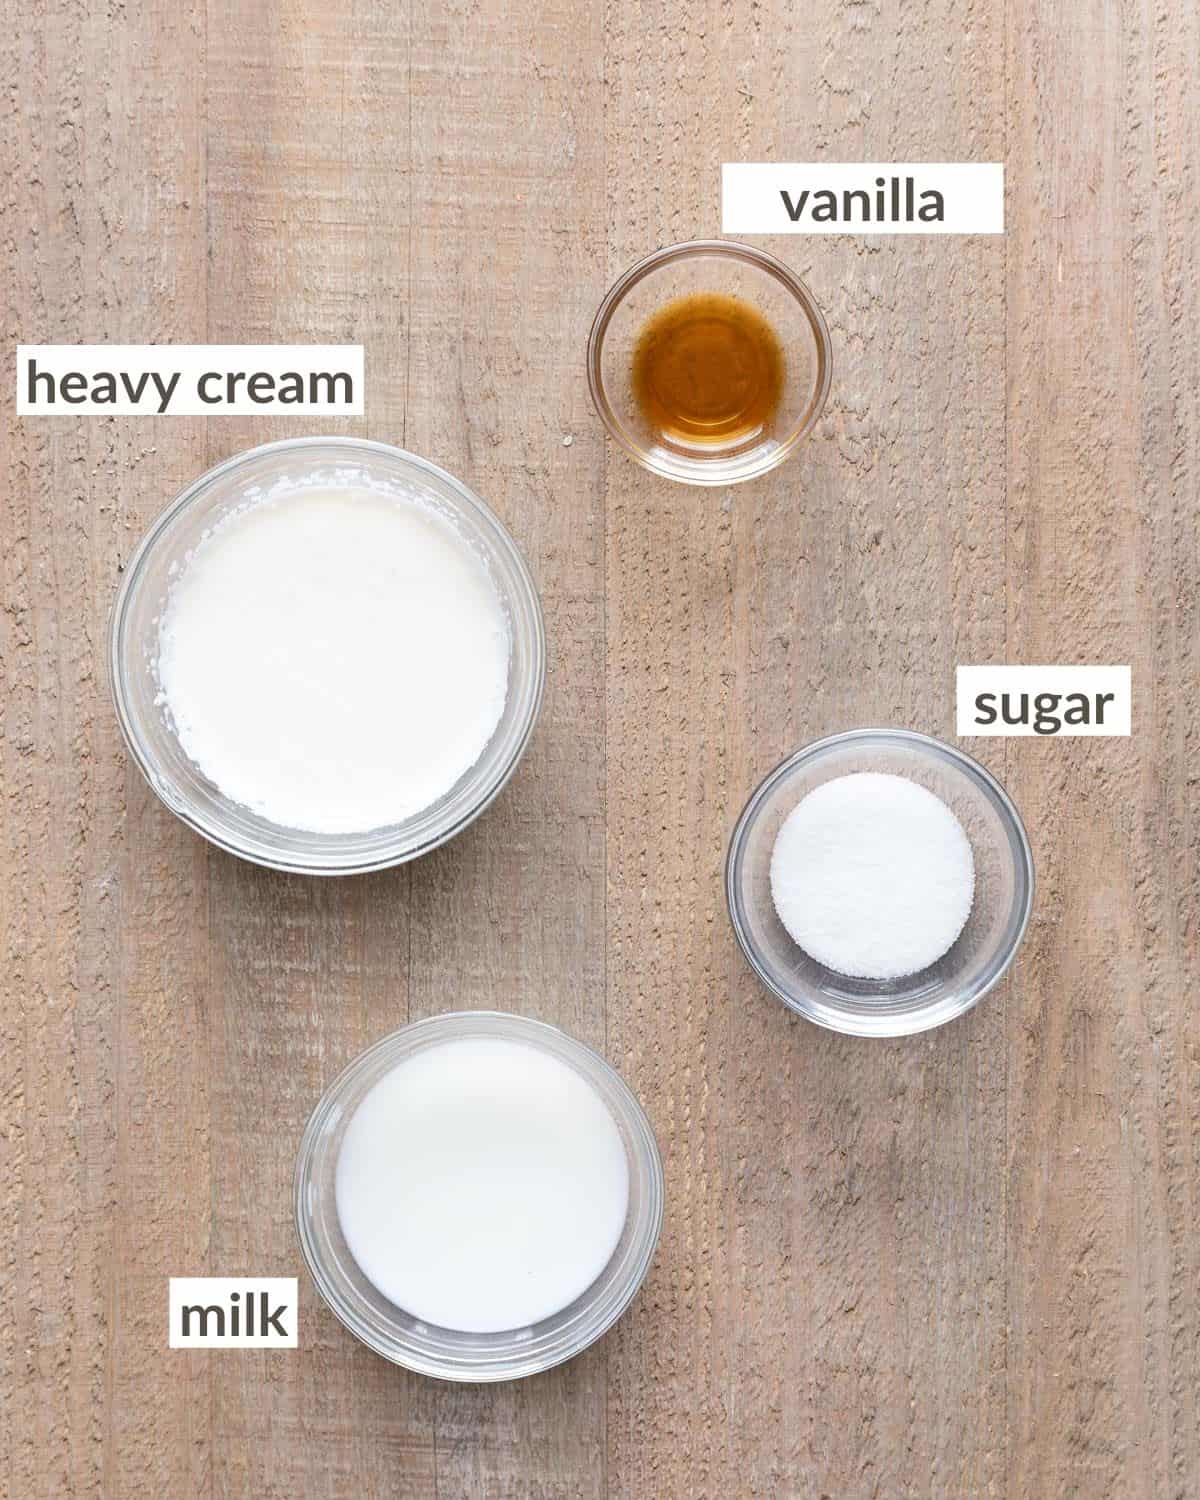 ingredients needed for sweet cream cold foam